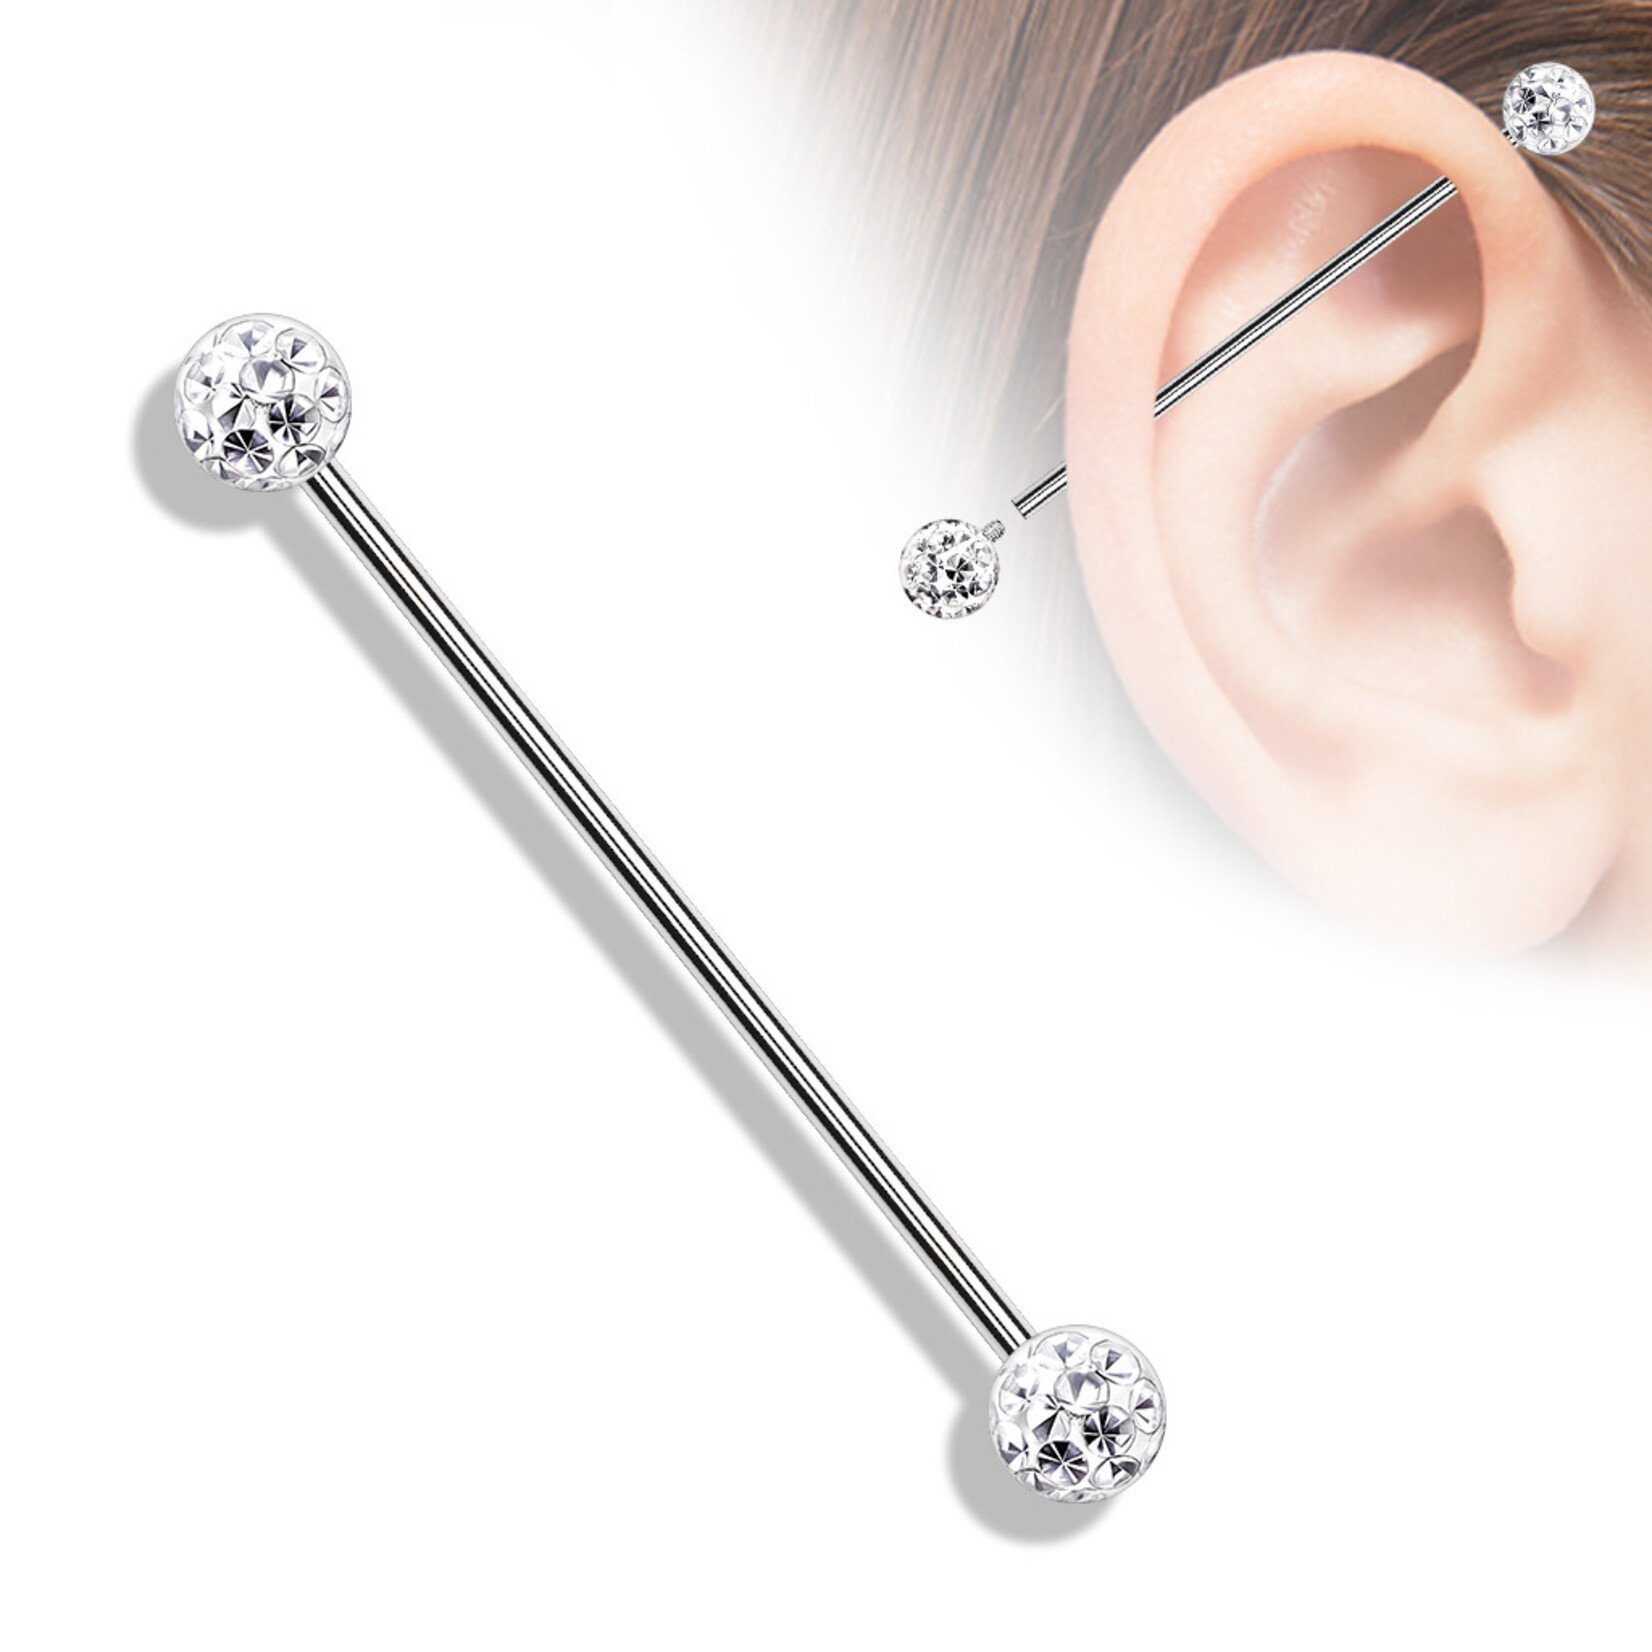 Body Jewelry Crystal ball Industrial Barbell